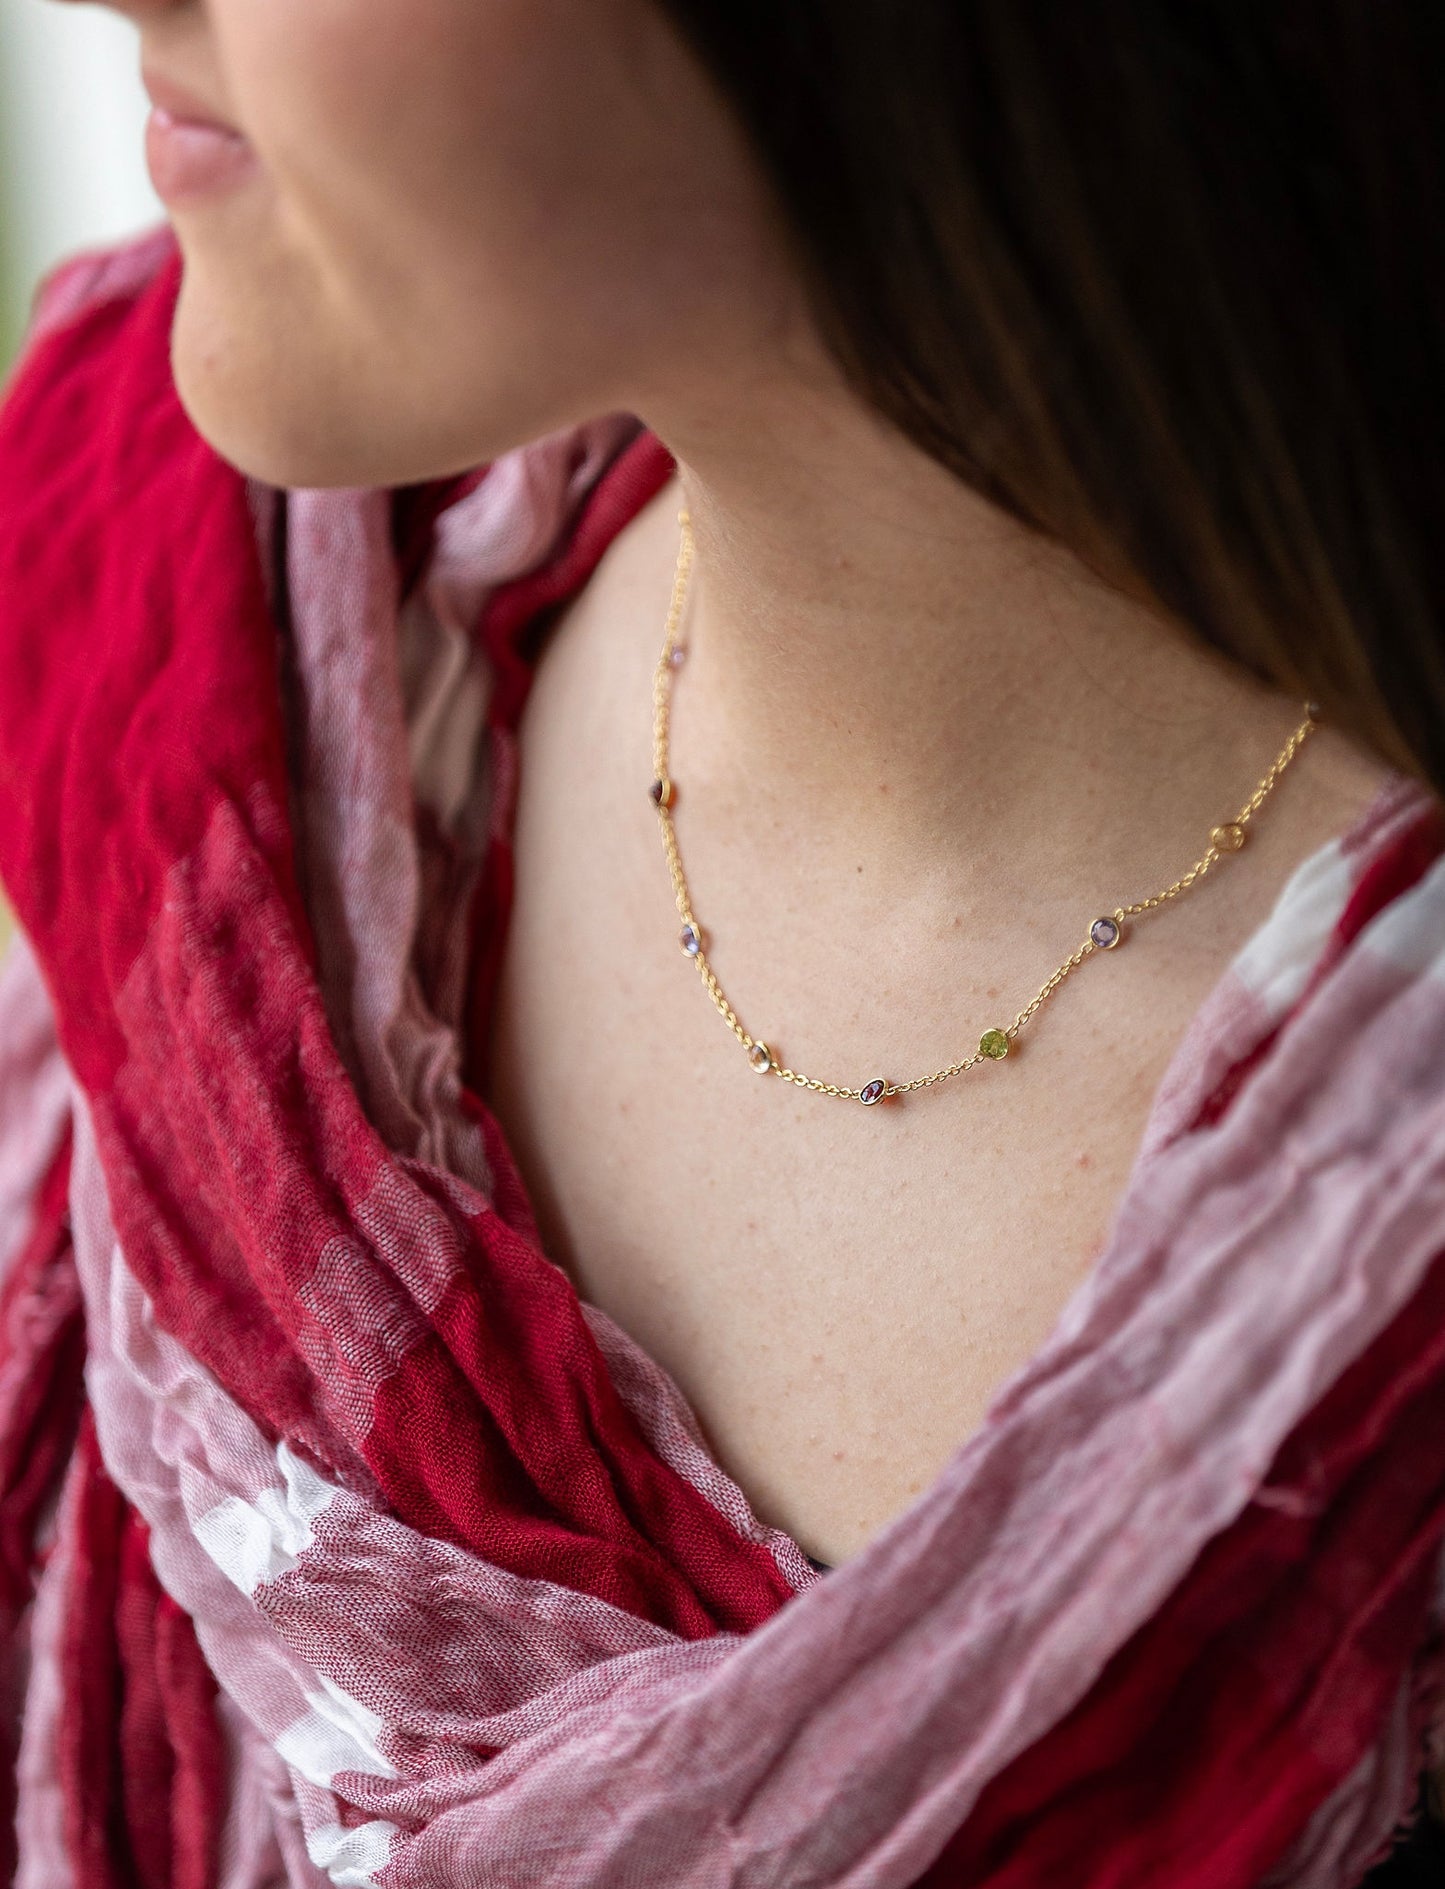 Stunning gold necklace with shades of pink semi precious stones inbedded in chain.